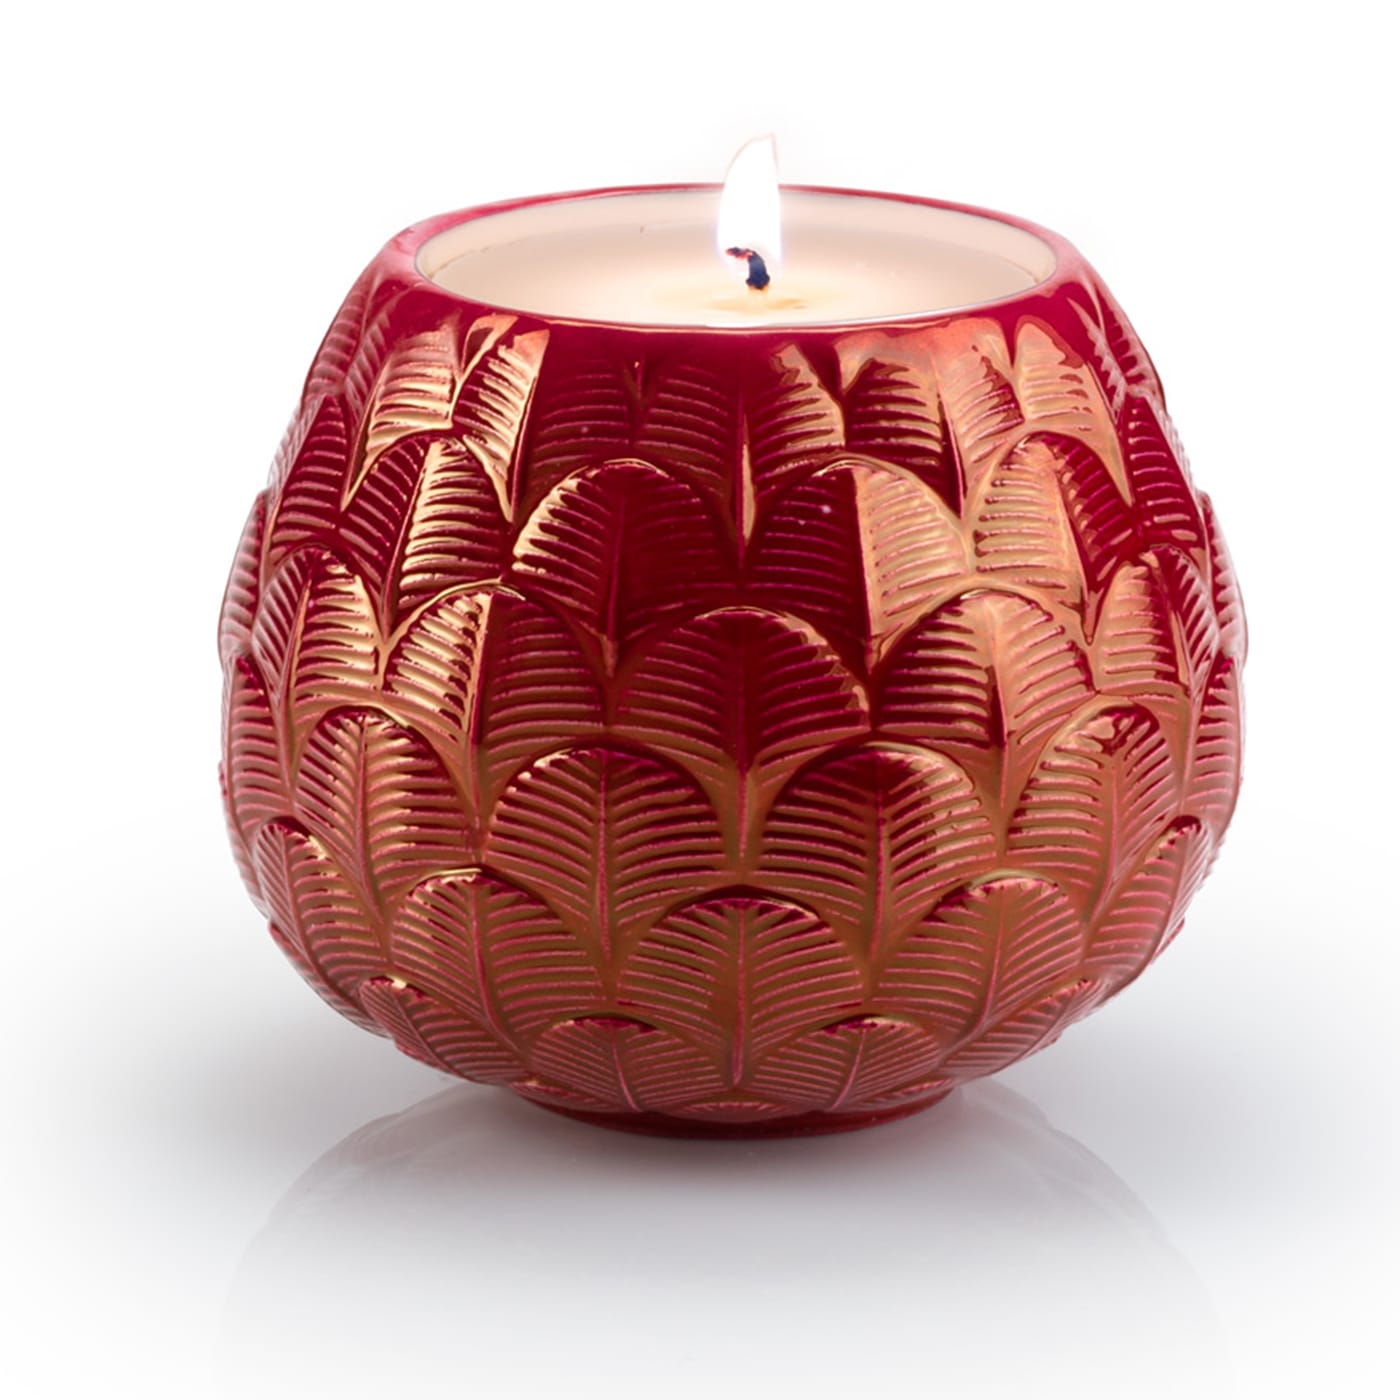 CHARLOTTE PEACOCK CANDLE COVER - RED Villari Home Couture